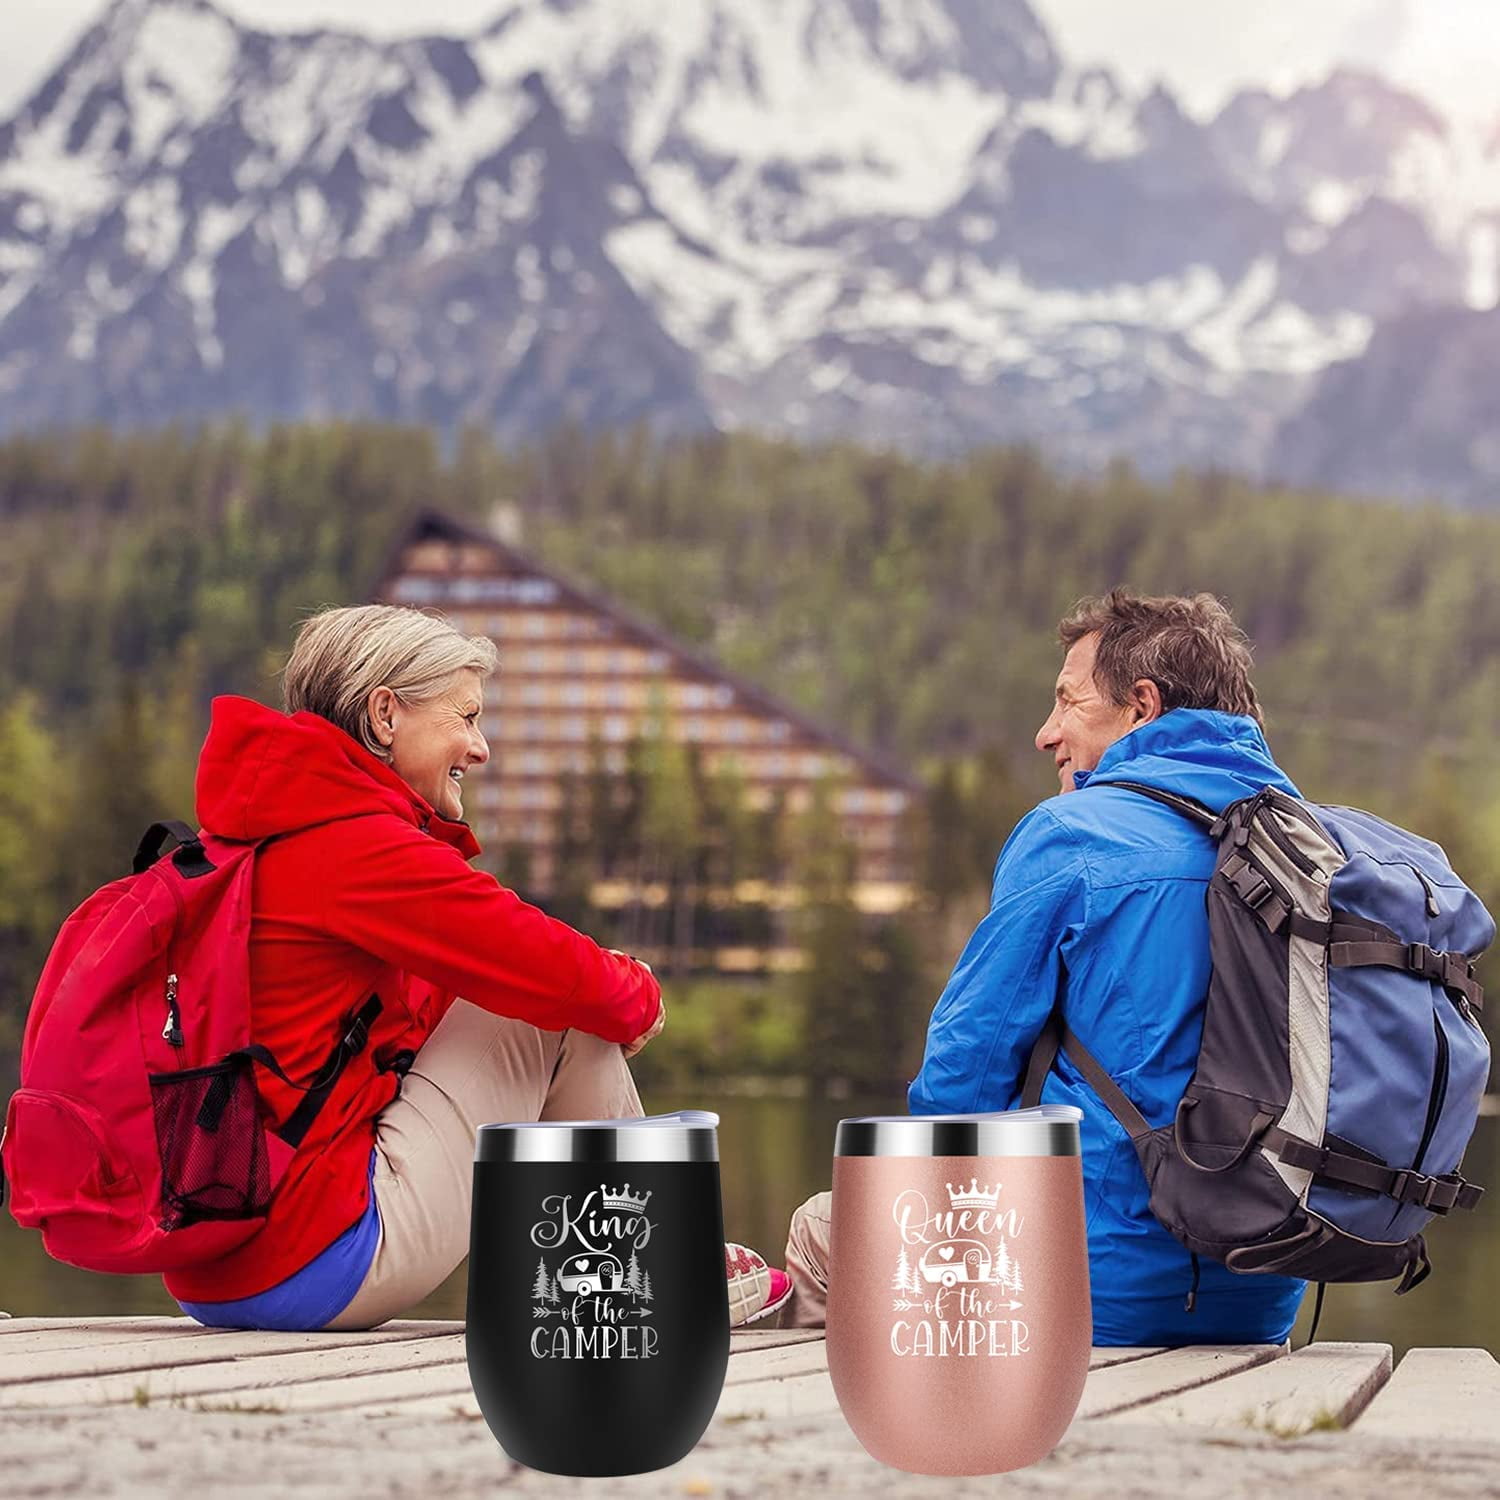 Camping Queen Tumbler Camper Life Gifts Camping Flamingo Tumbler Stainless  Steel Travel Cup For Camp…See more Camping Queen Tumbler Camper Life Gifts